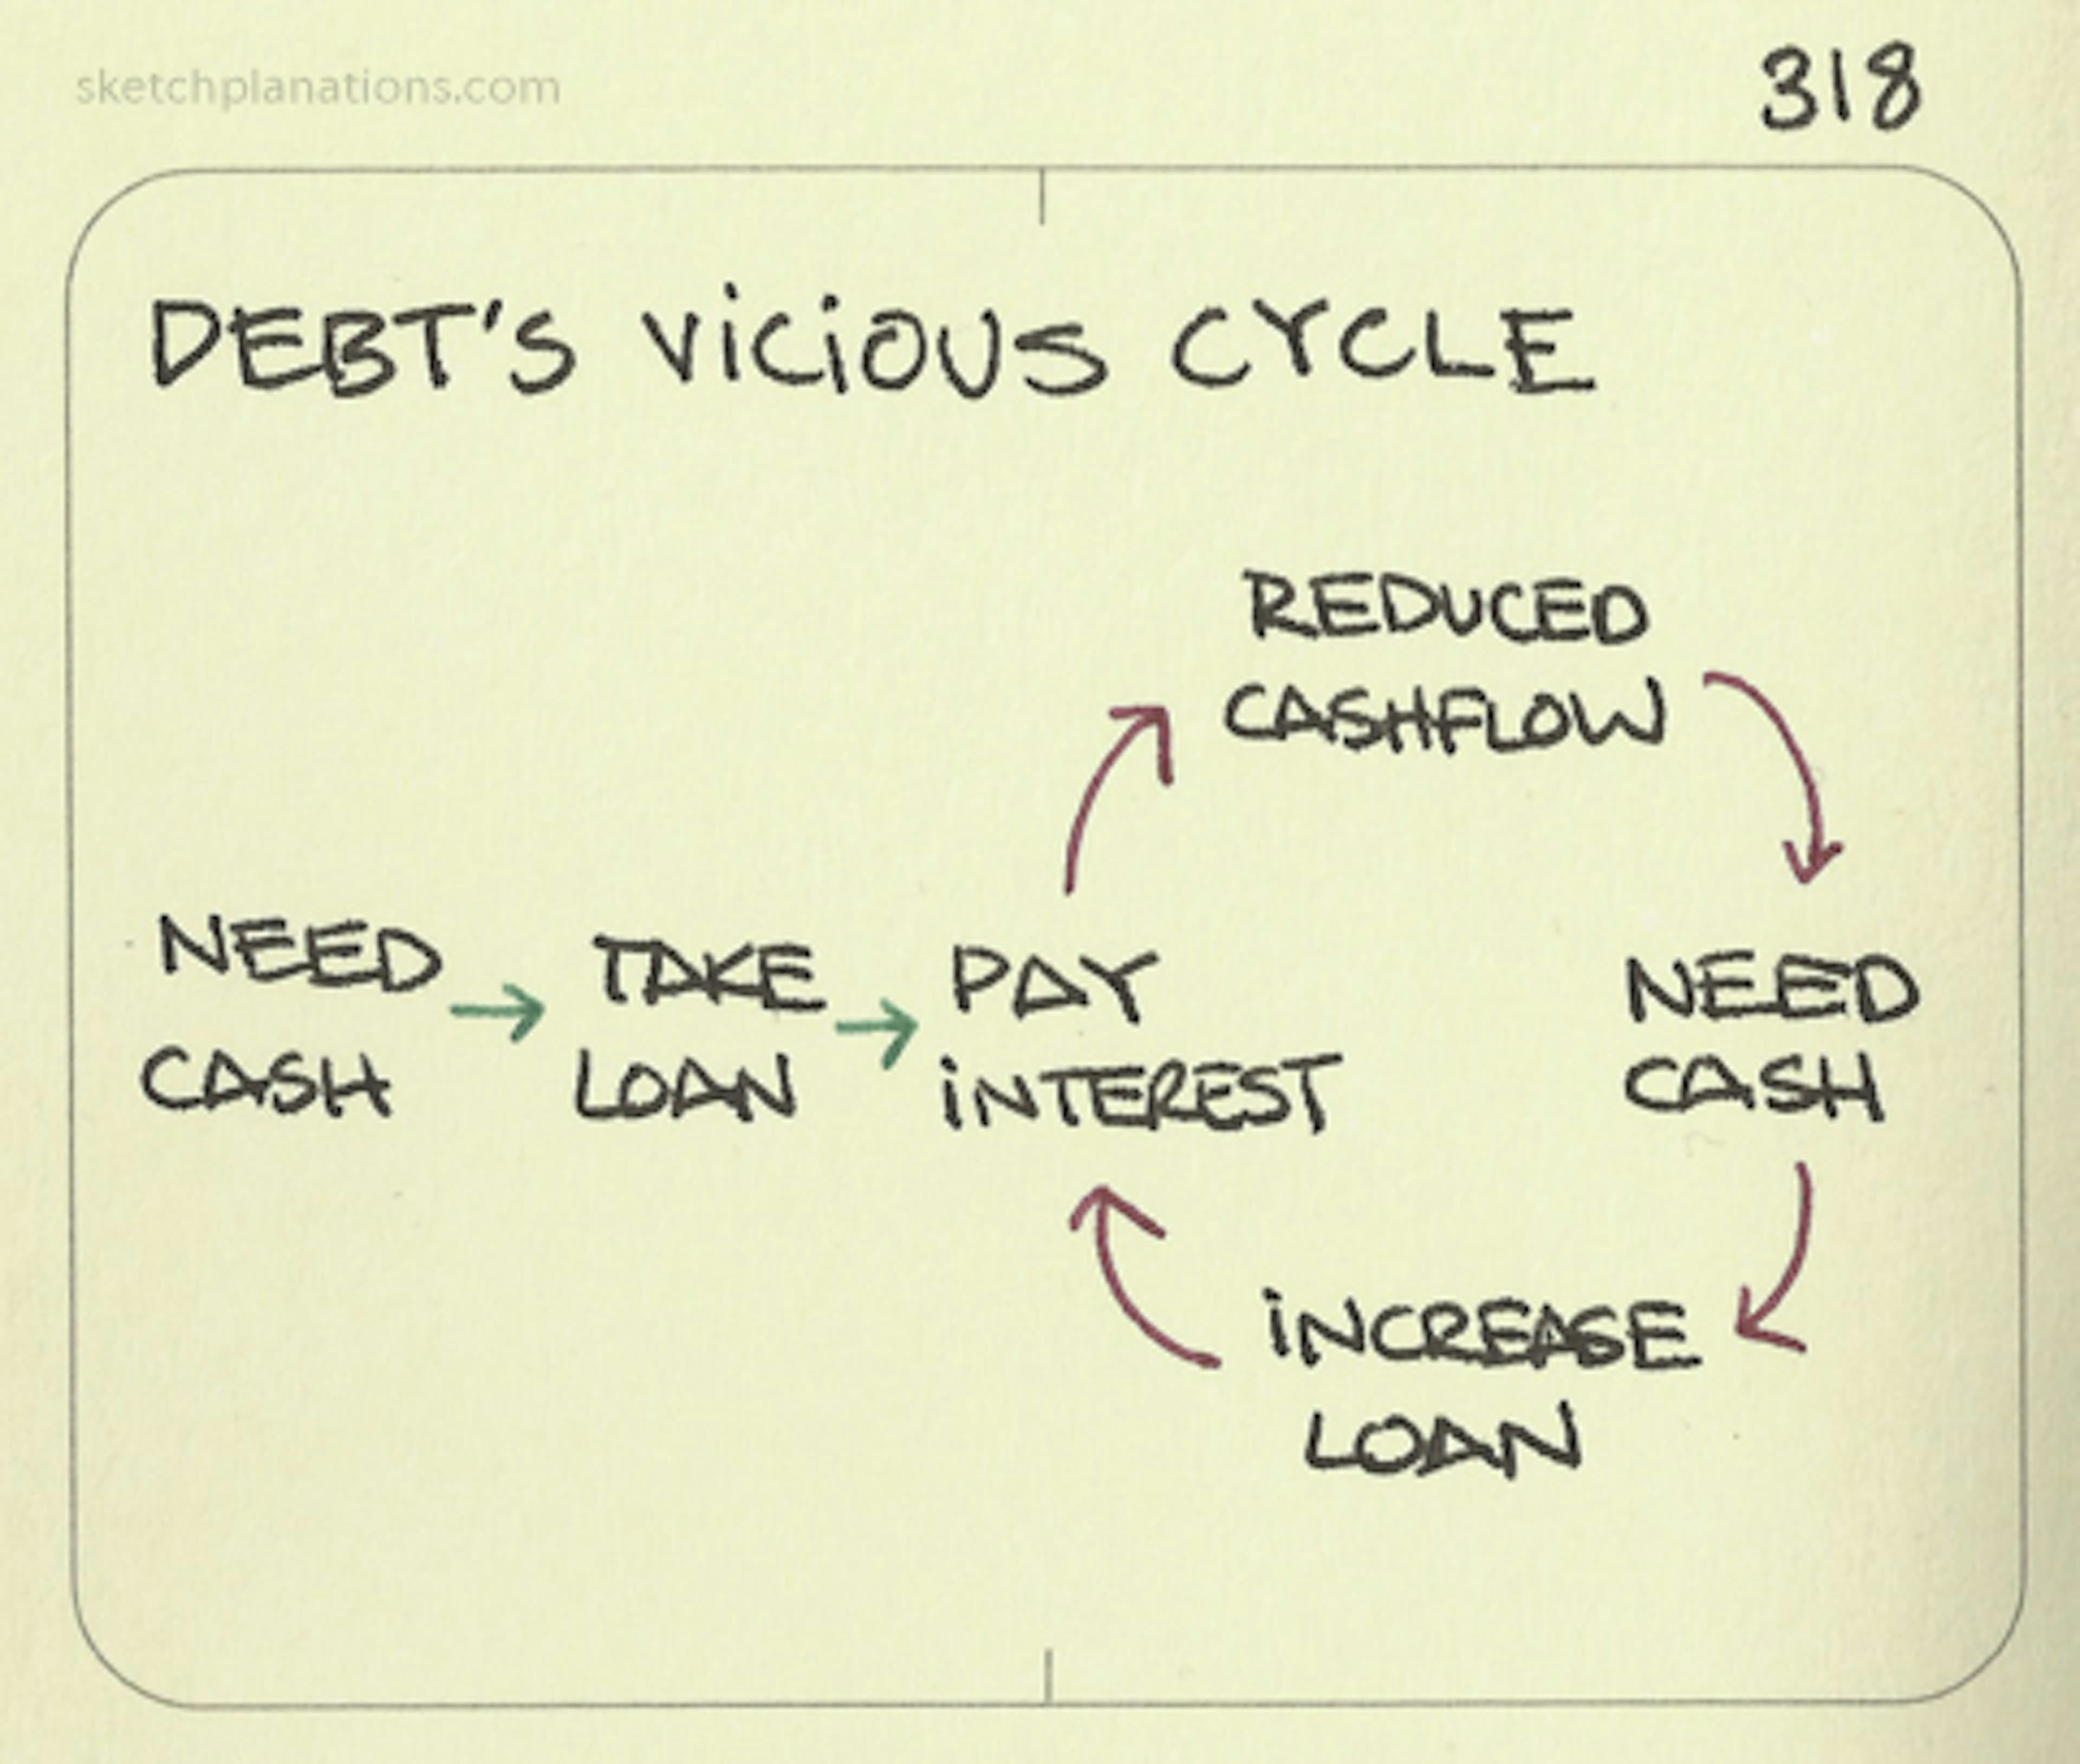 Debt's vicious cycle illustration: A flow diagram of a vicious cycle starting with needing cash, to taking a loan and then hitting a cycle of paying interest, lower cashflow, needing cash, increasing loan and so on.